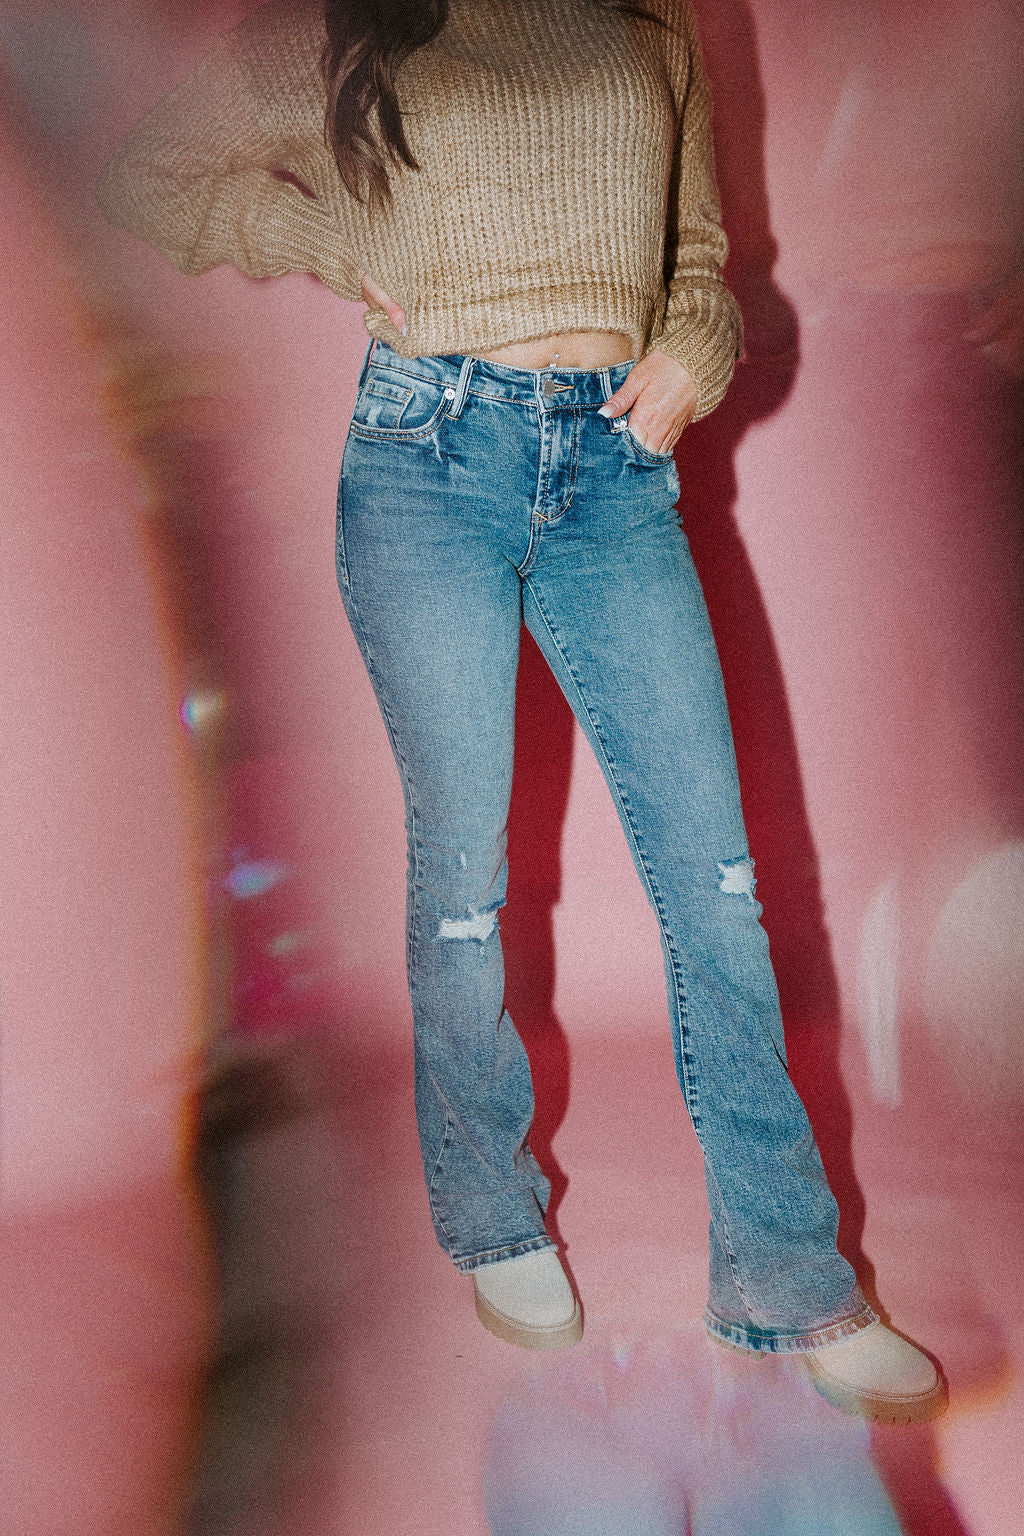 Fountain Flare Jeans